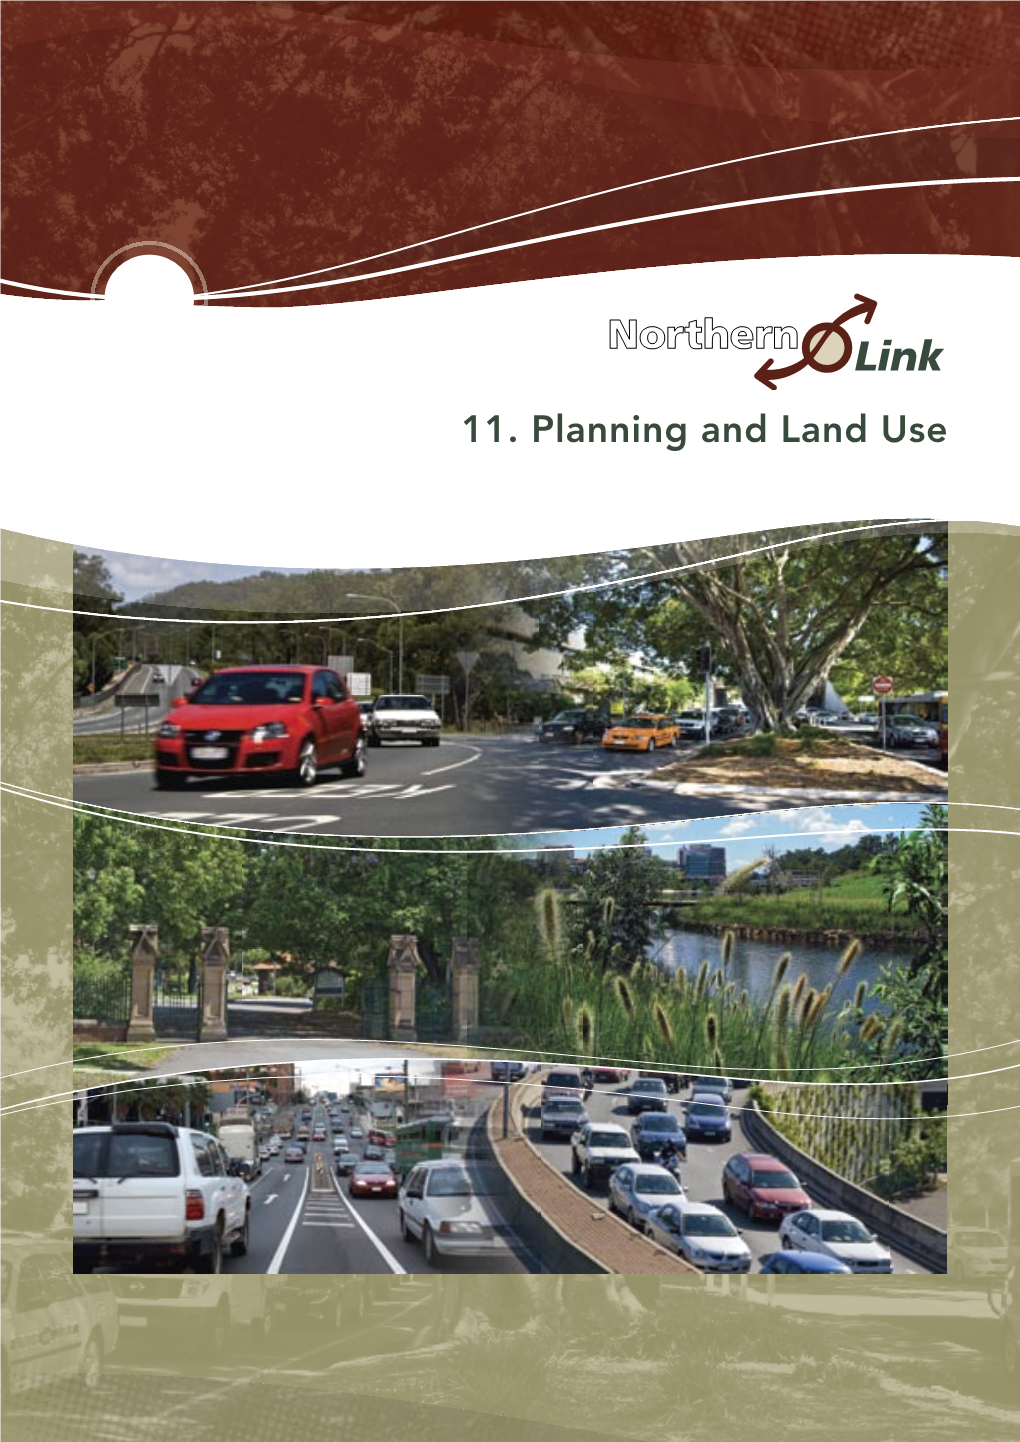 11. Planning and Land Use